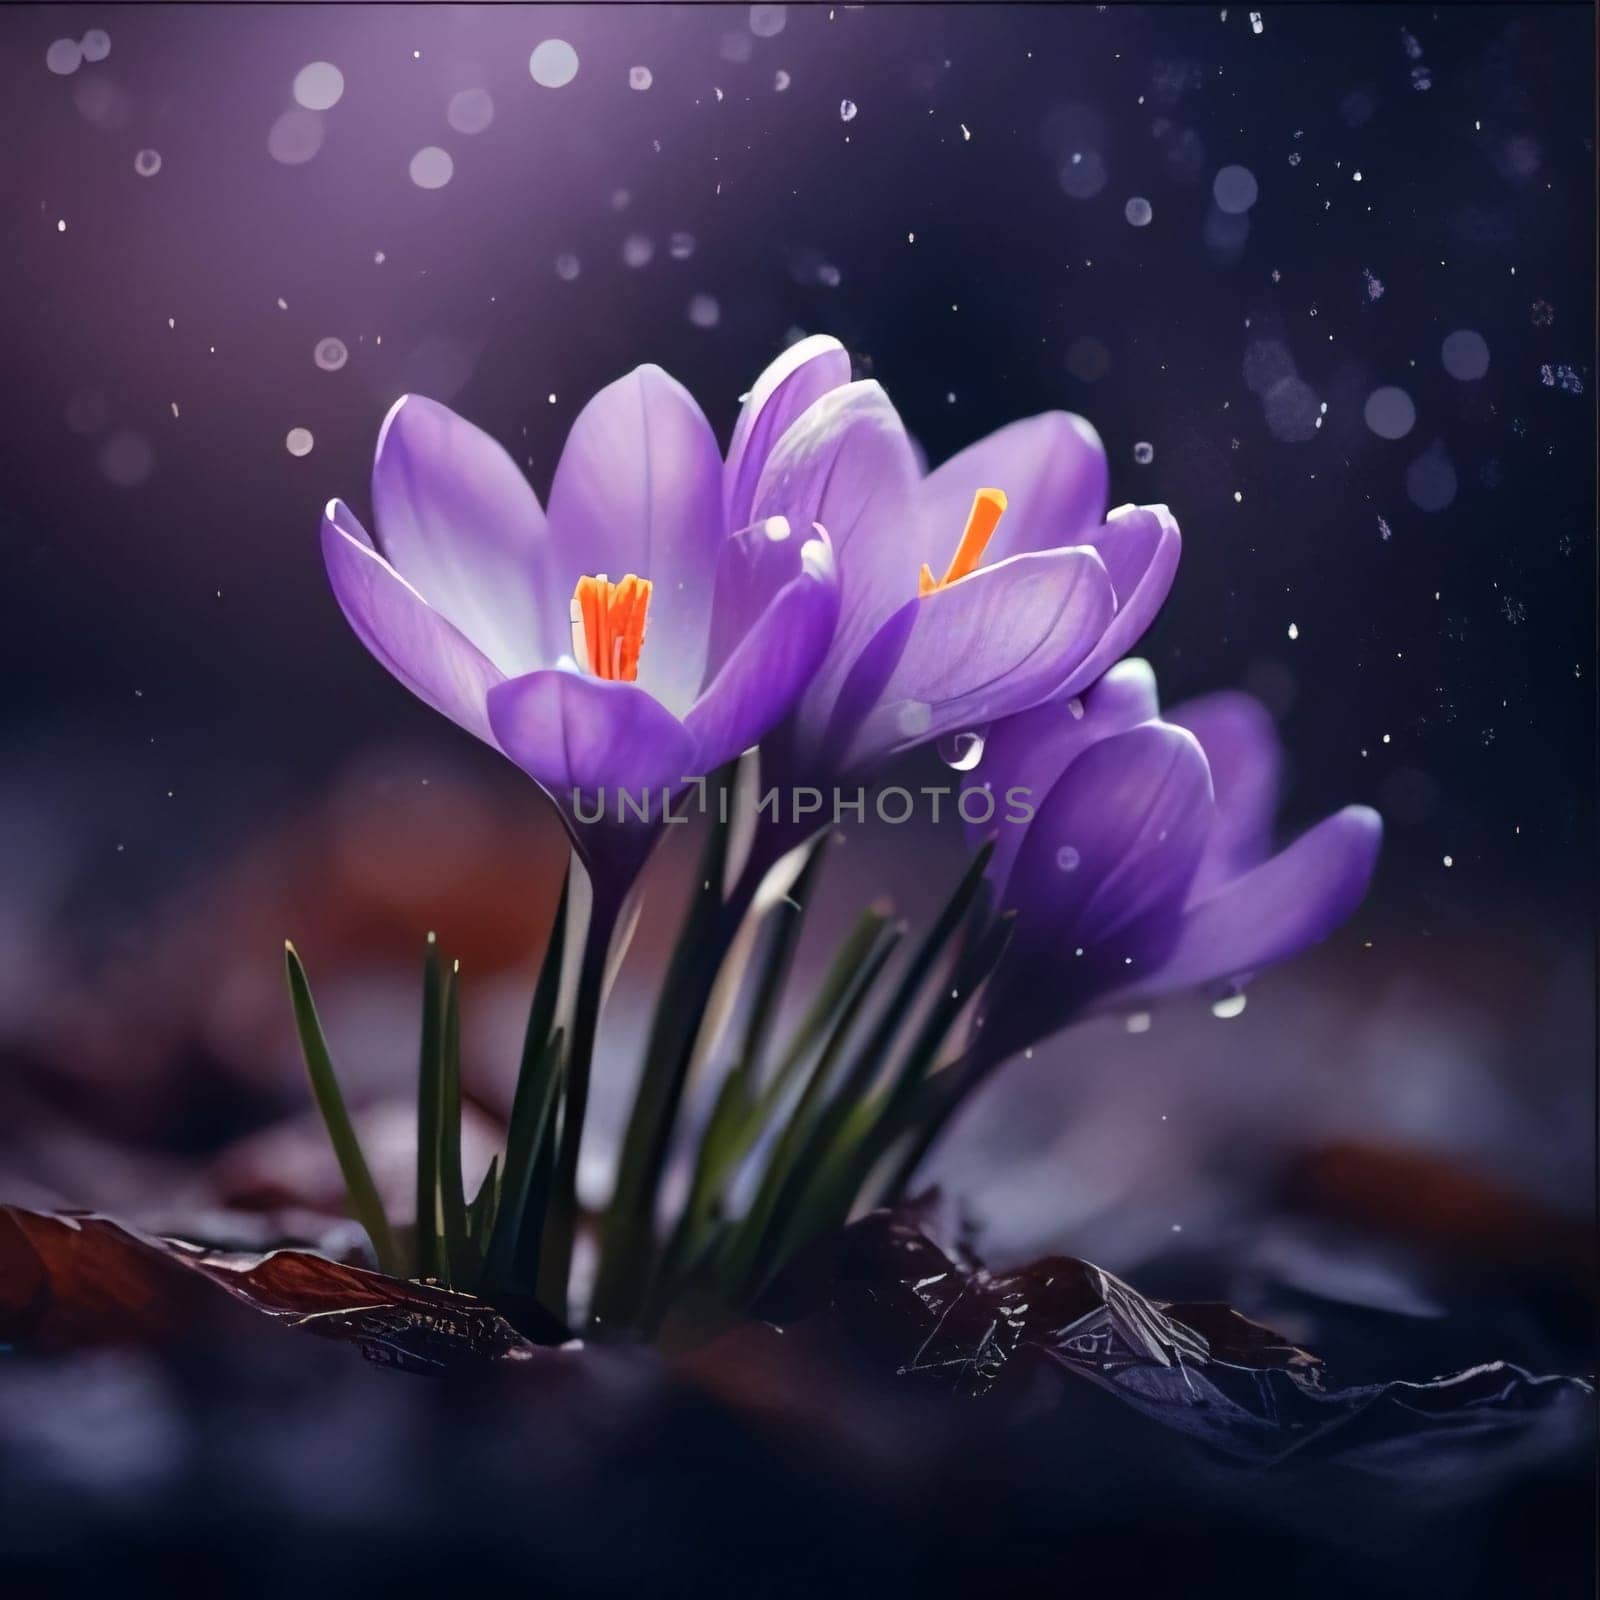 Crocuses on dark background. Flowering flowers, a symbol of spring, new life. A joyful time of nature waking up to life.